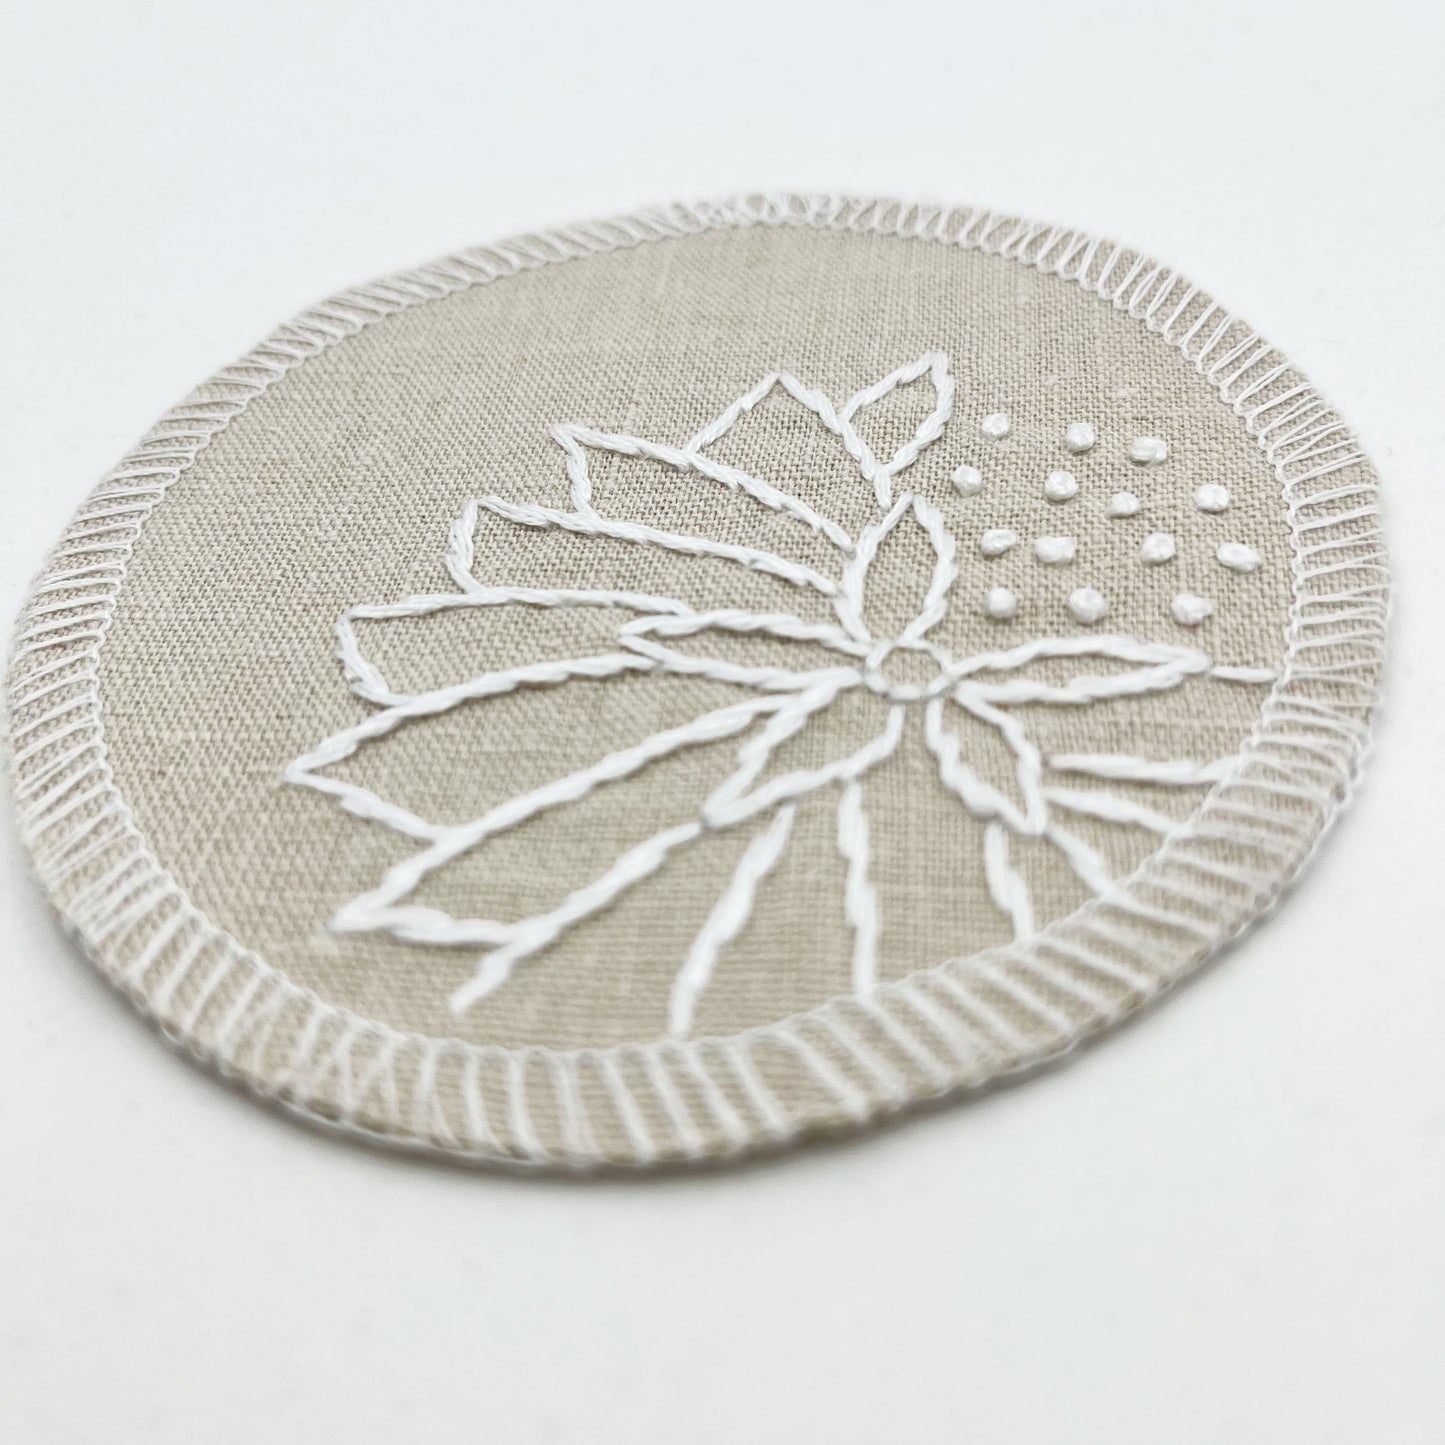 a close up angled view of a circle shaped patch made out of natural colored cotton linen fabric, hand embroidered with an abstract dandelion in white colored floss, outlines of petals, edges overlocked in white, on a white background